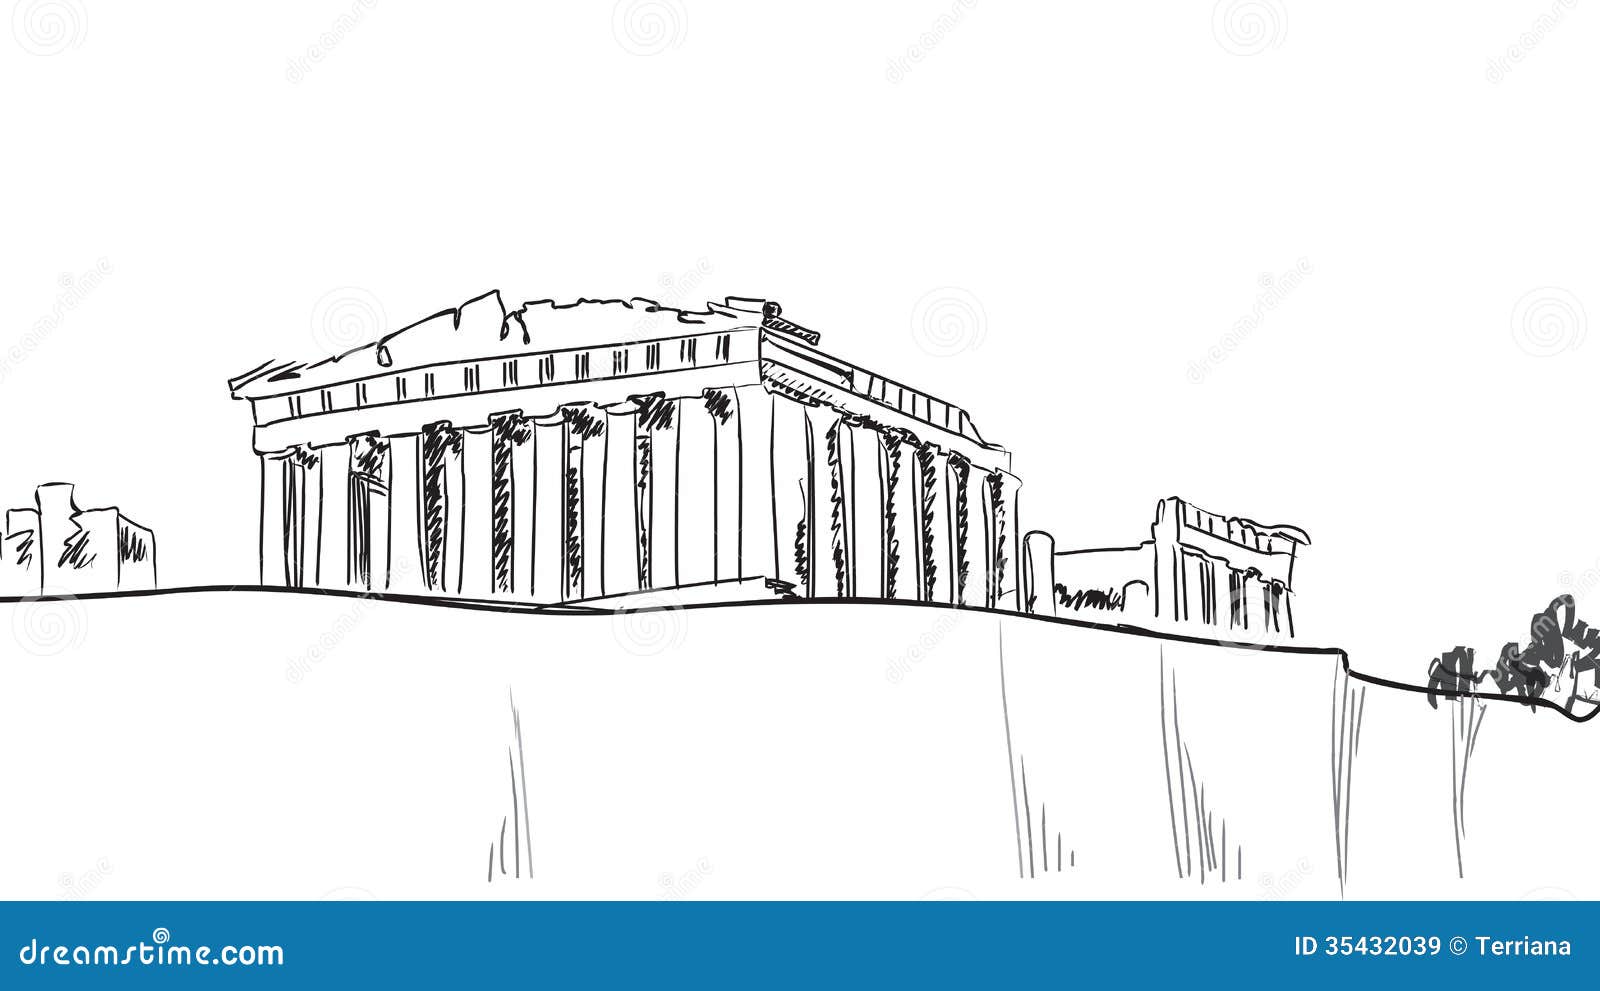 Buyenlarge The Propylaea Of The Acropolis At Athens On Paper by J. Buhlmann  Graphic Art | Wayfair